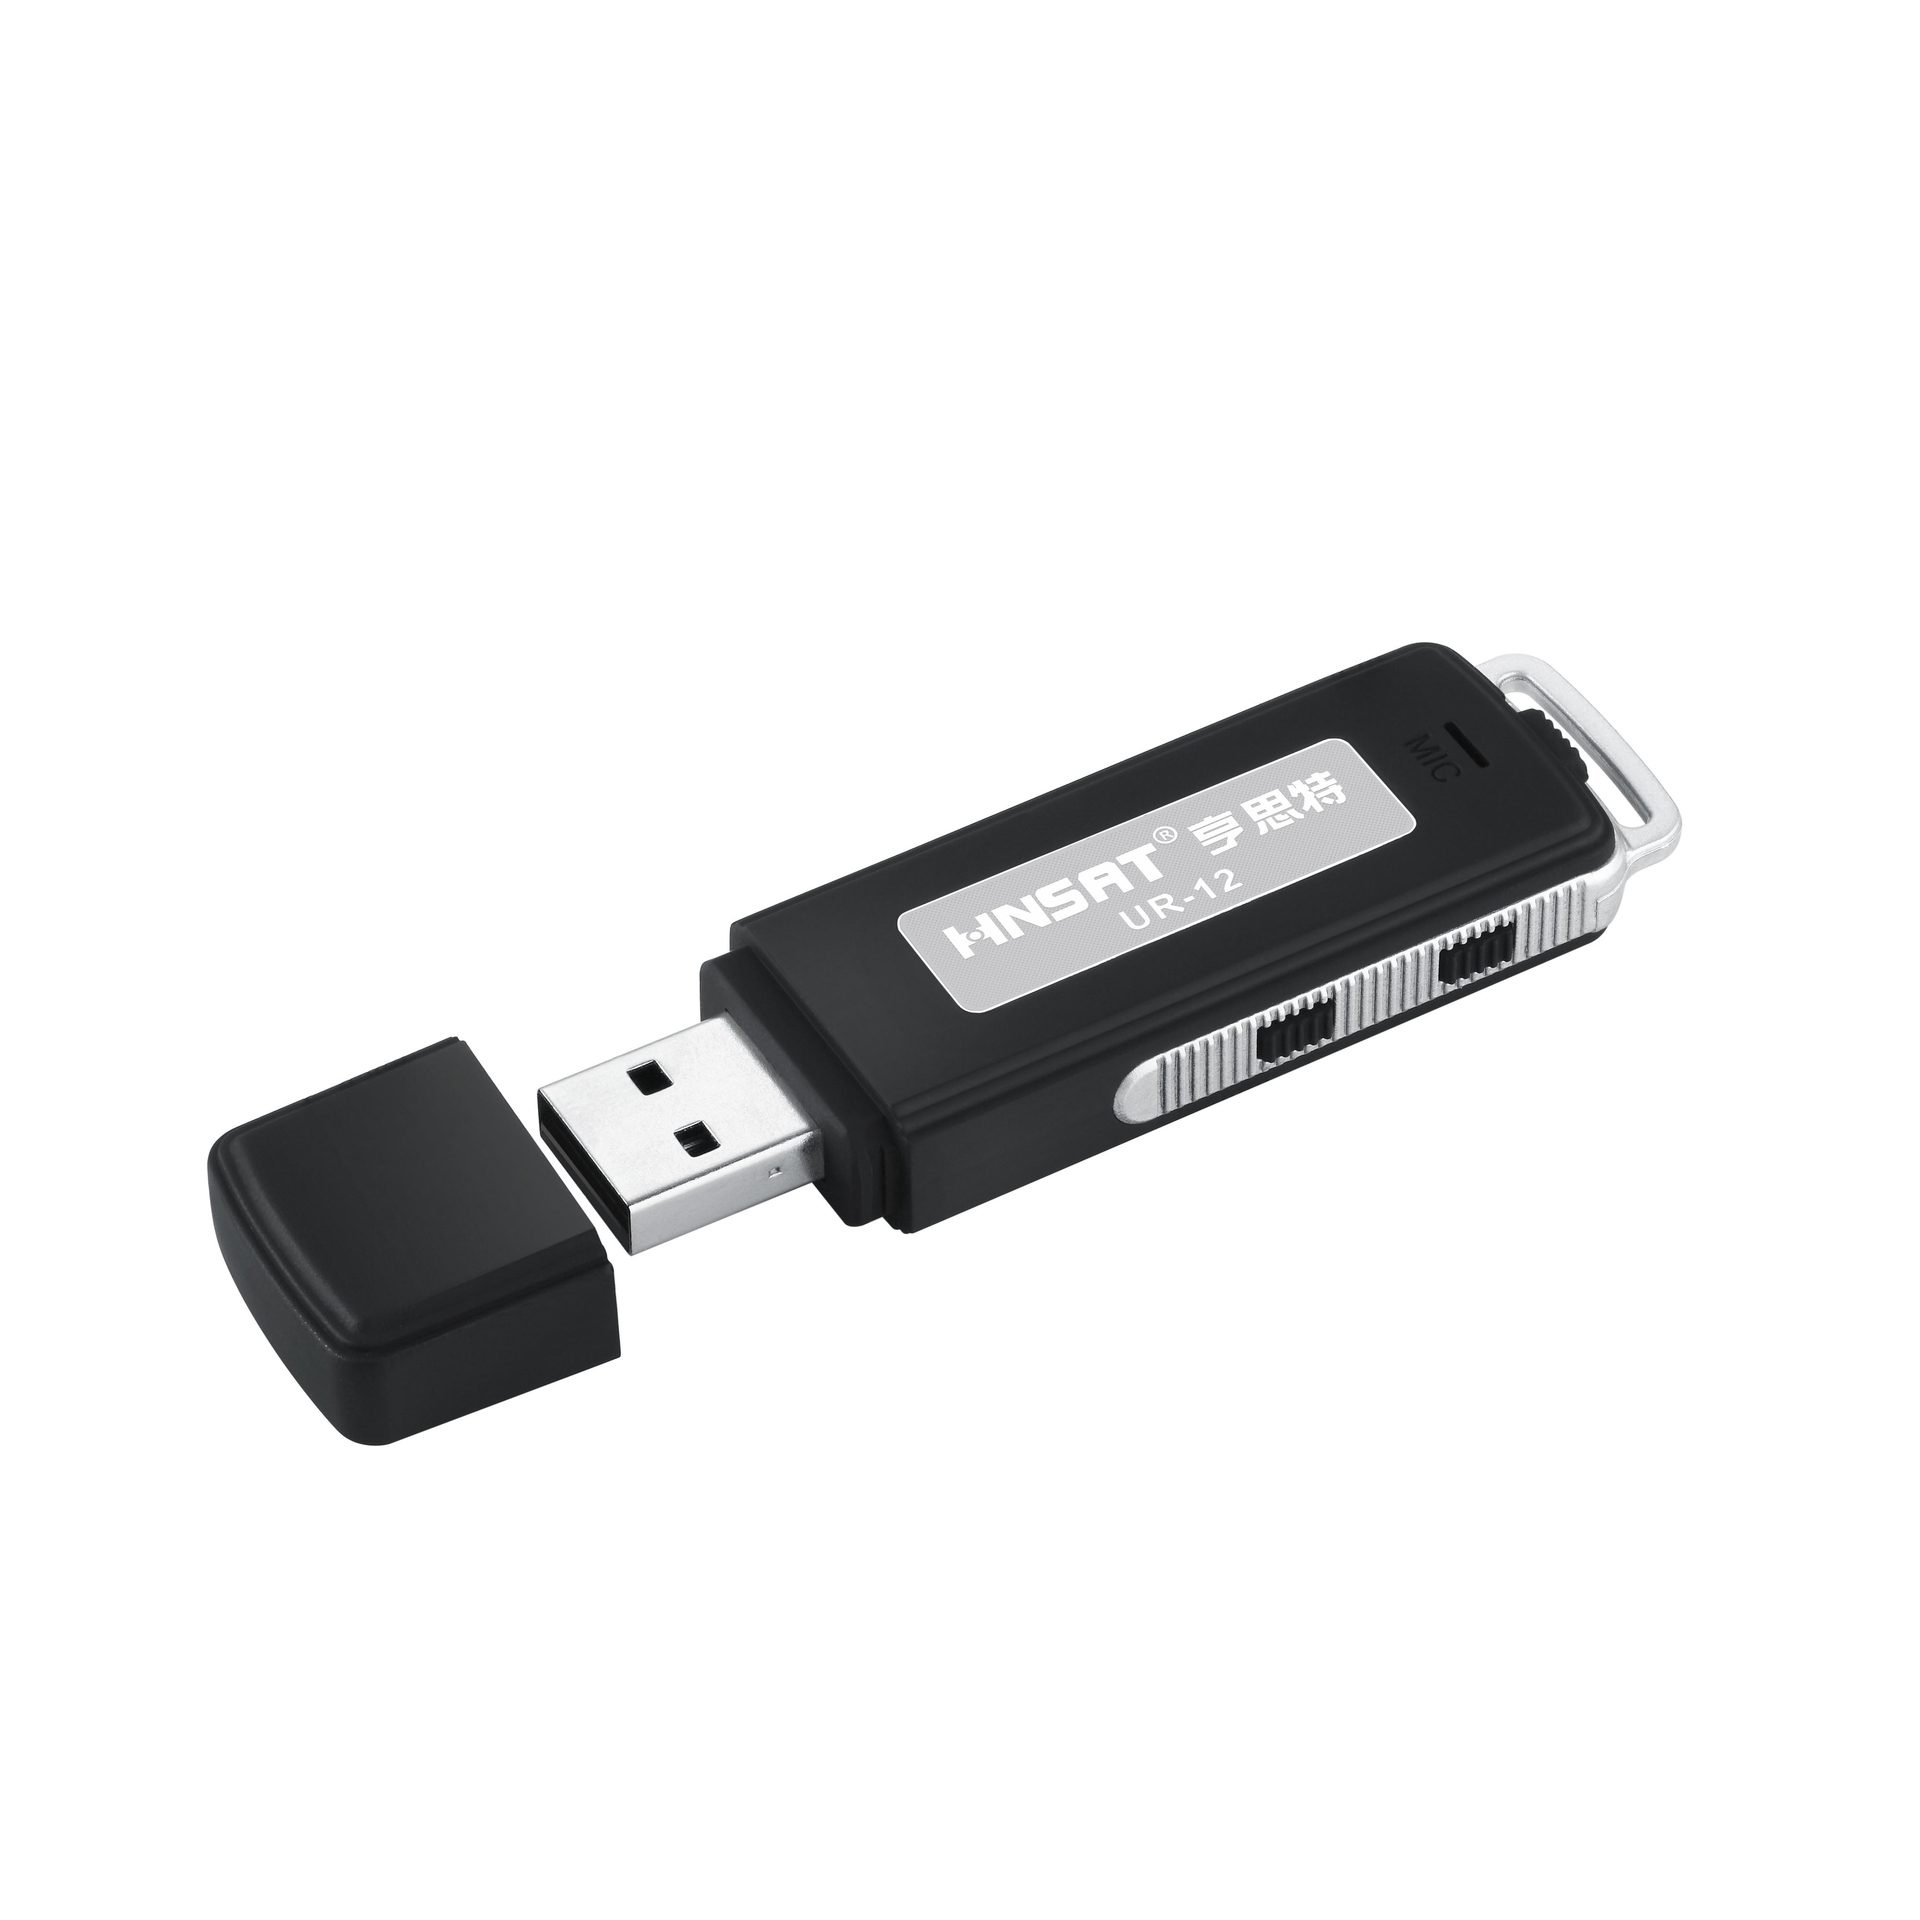 product-Hnsat-USB Voice Recorder, Long Time High Fidelity Recording Device And Dictaphone With MP3-i